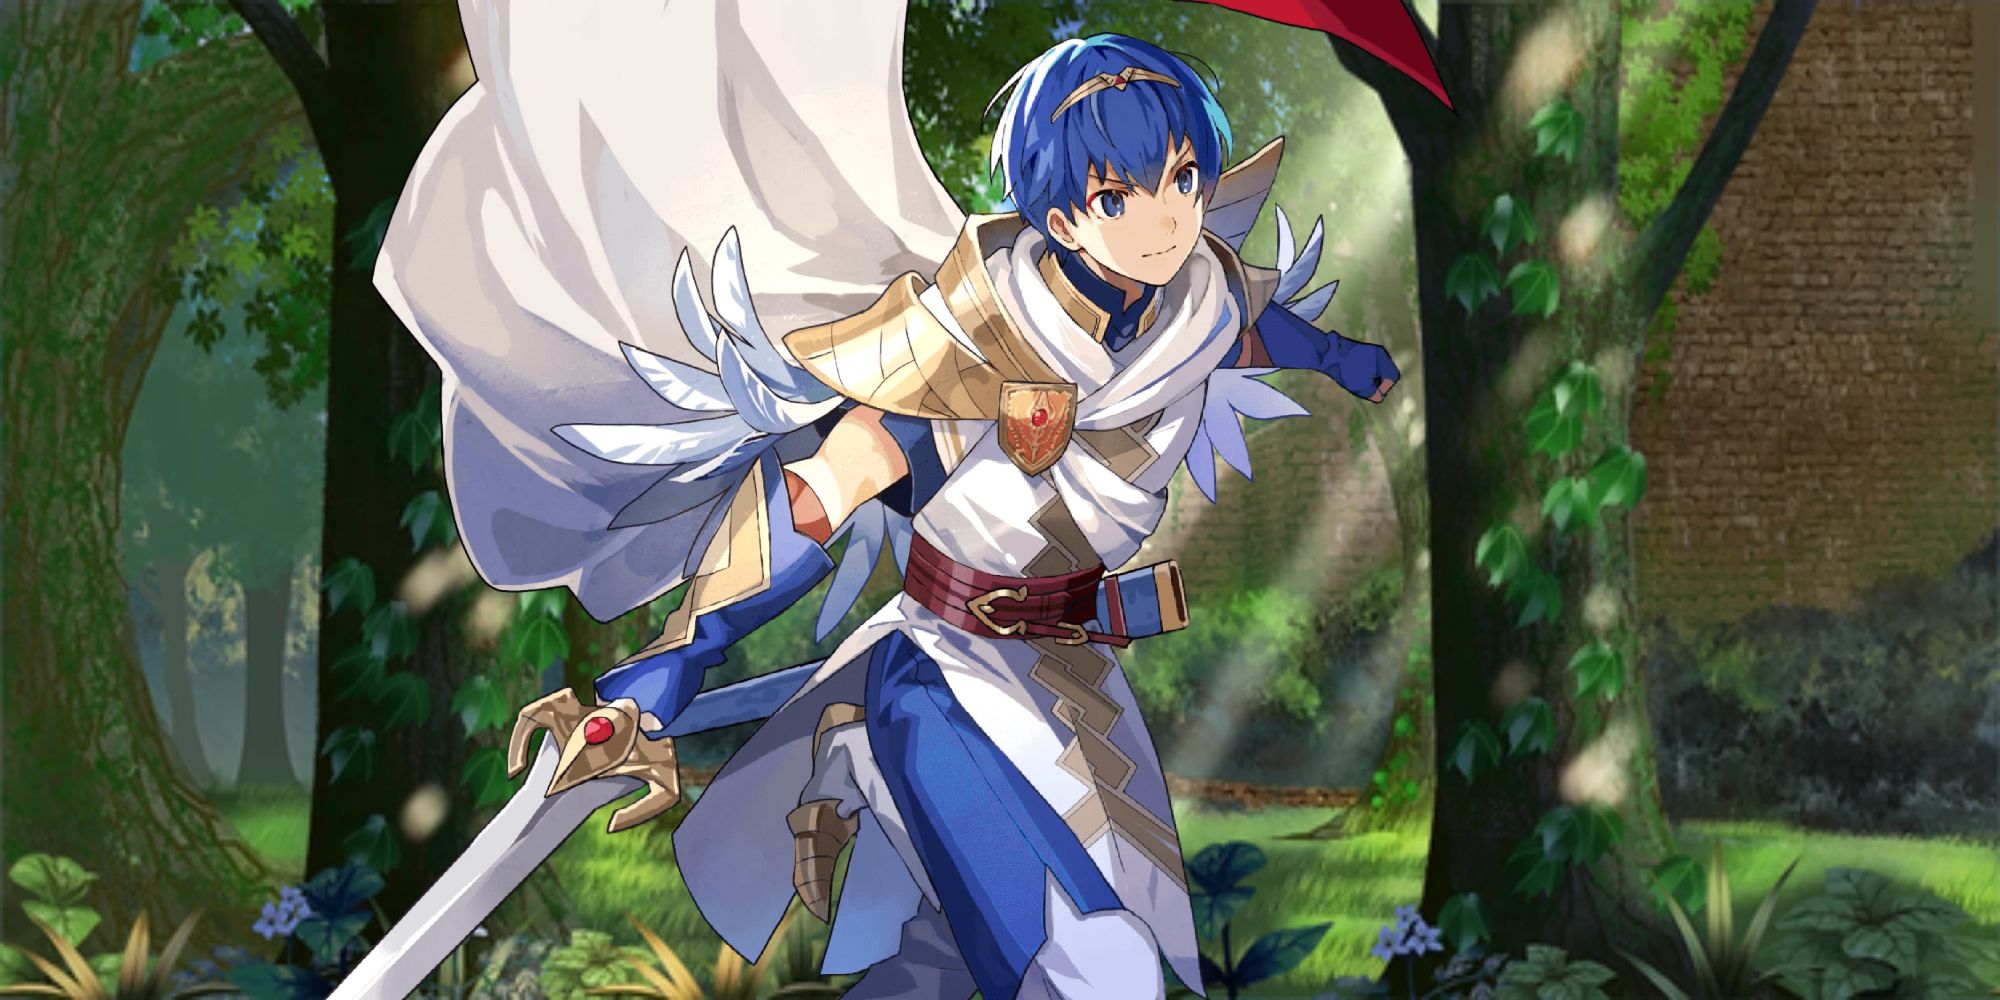 Fire Emblem Character Marth Yuri Lowenthal Voice Actor